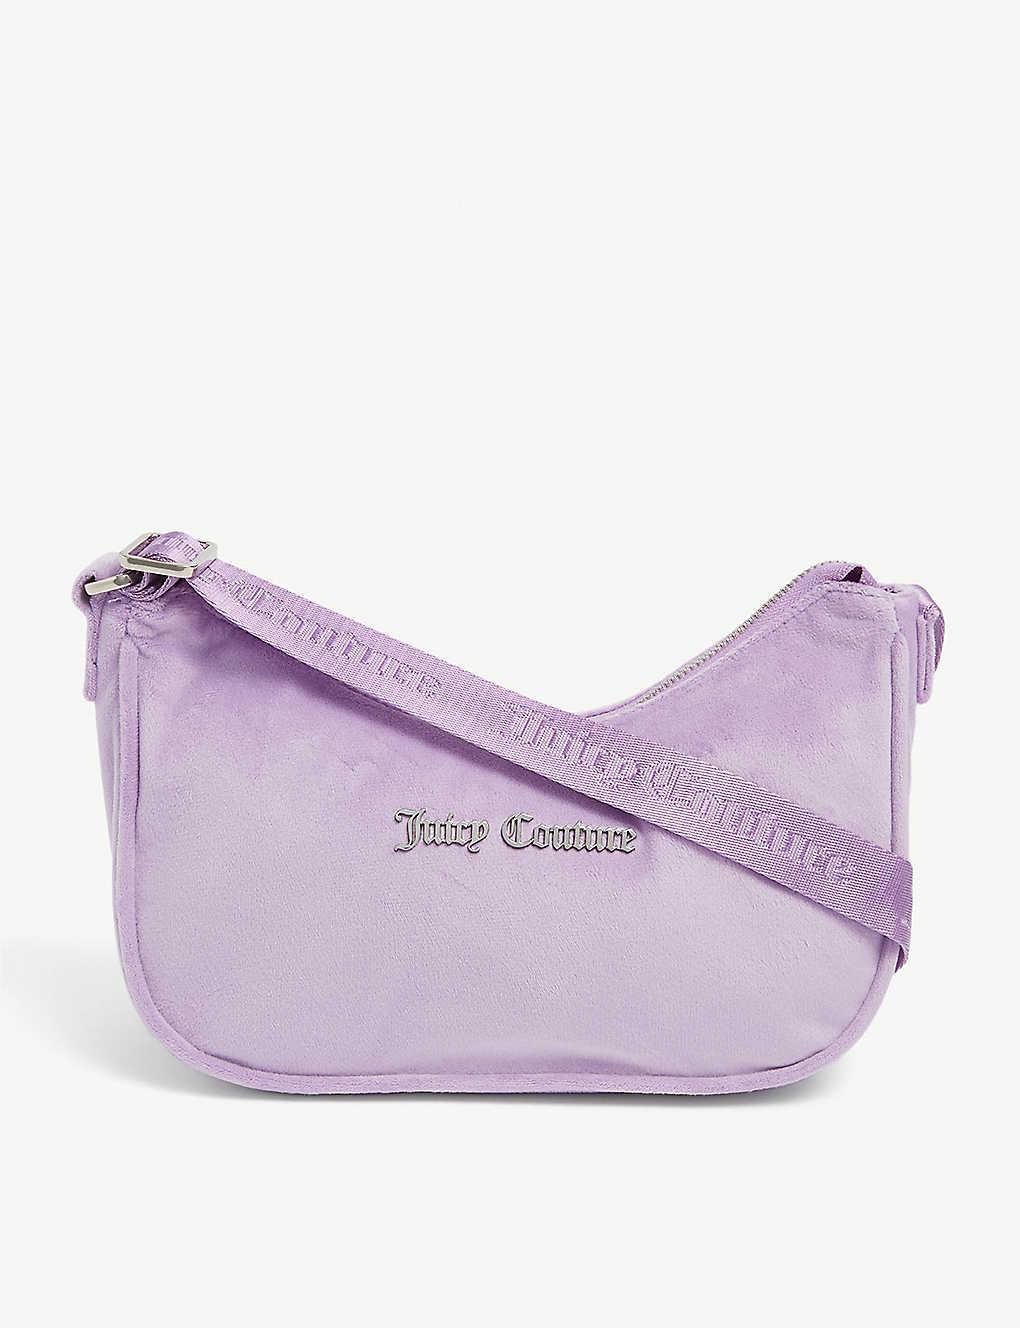 Juicy Couture Velour Bag Brown and Pink – Wear Garson